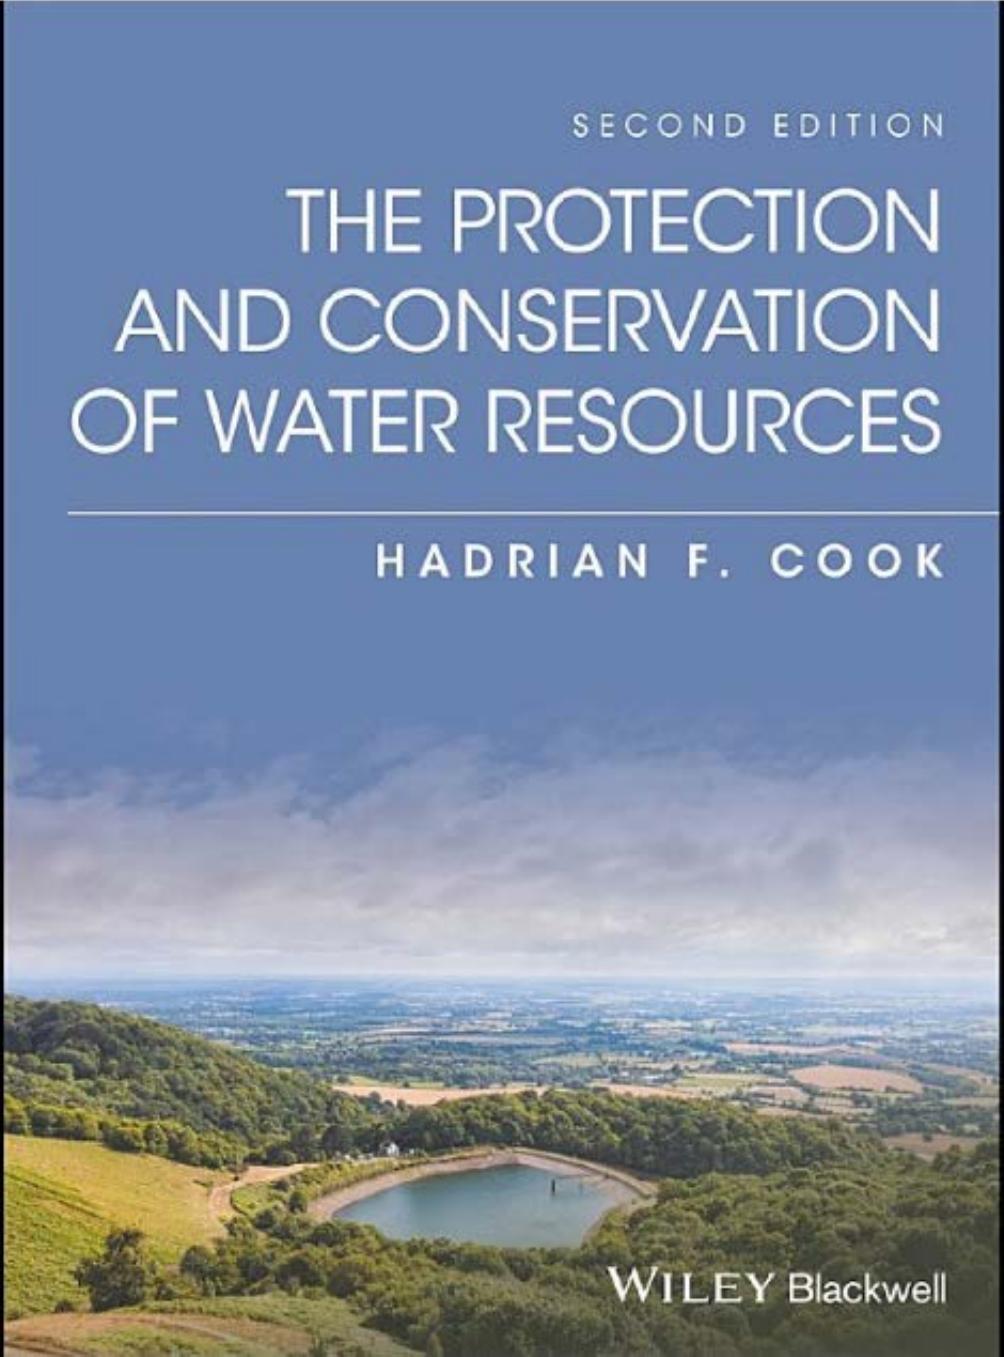 The Protection and Conservation of Water Resources ( PDFDrive ), 2017